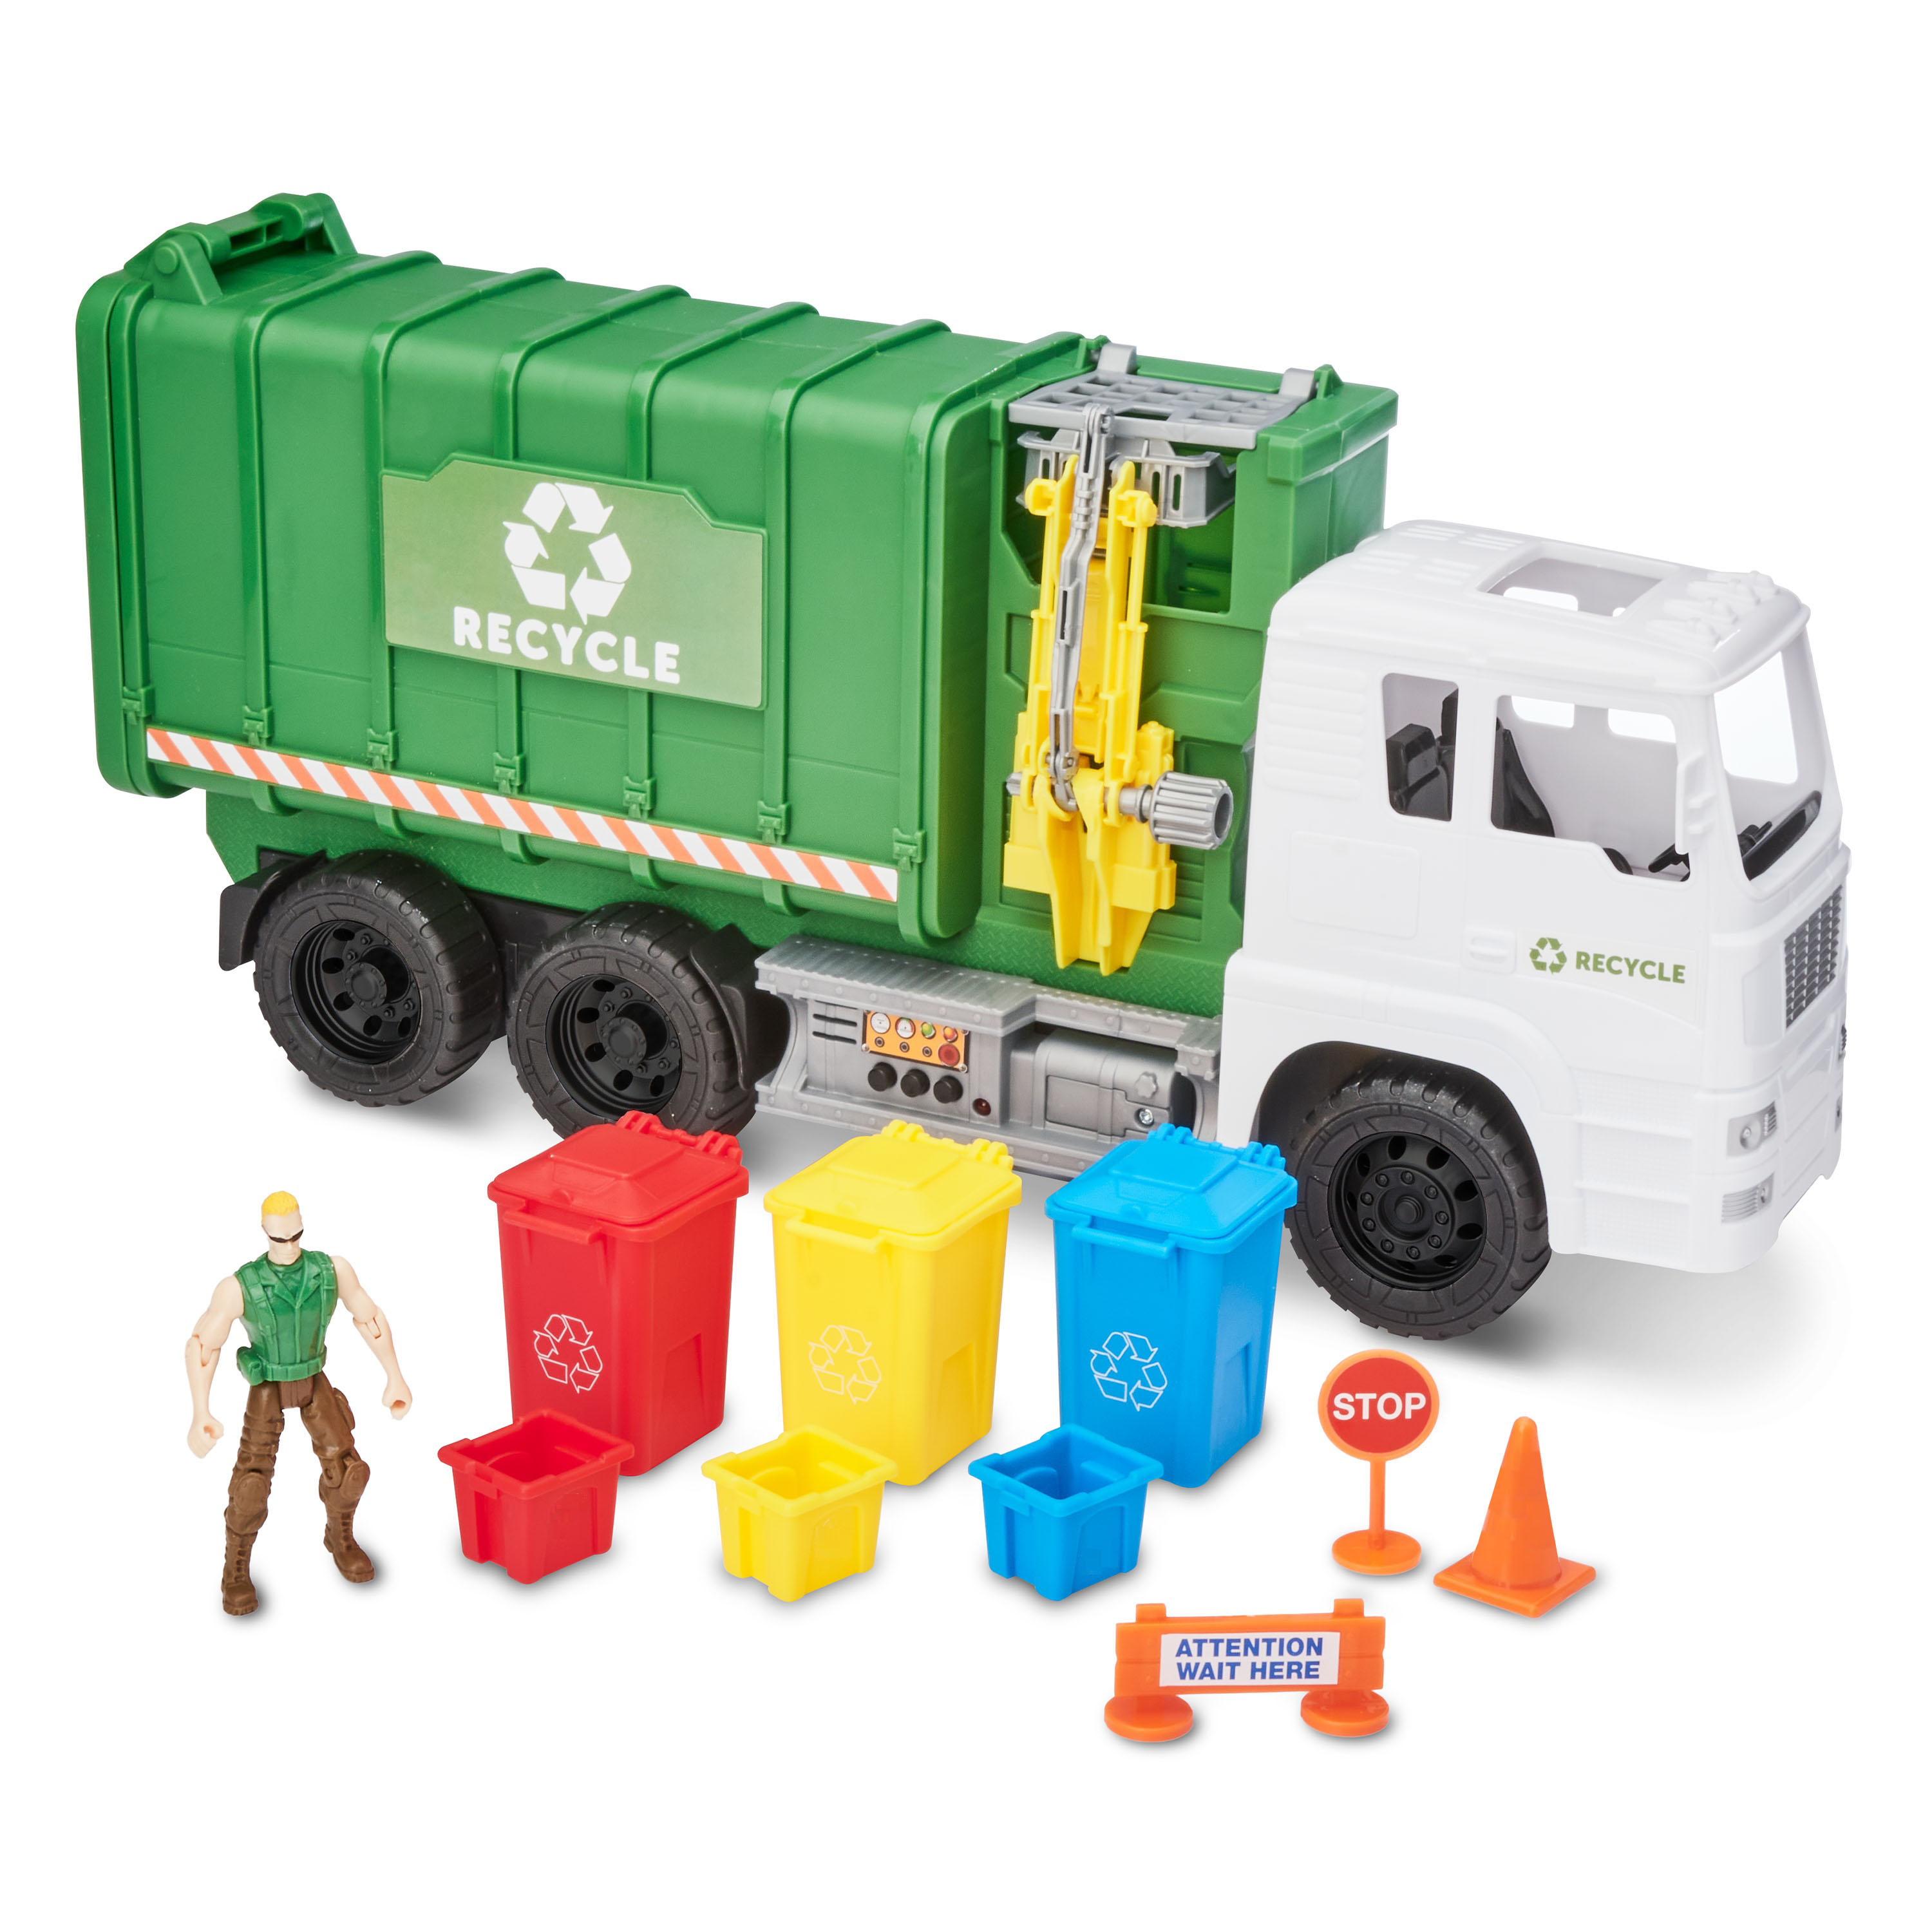 Kid Connection Recycling Truck Play Set, 11 Pieces - image 1 of 6